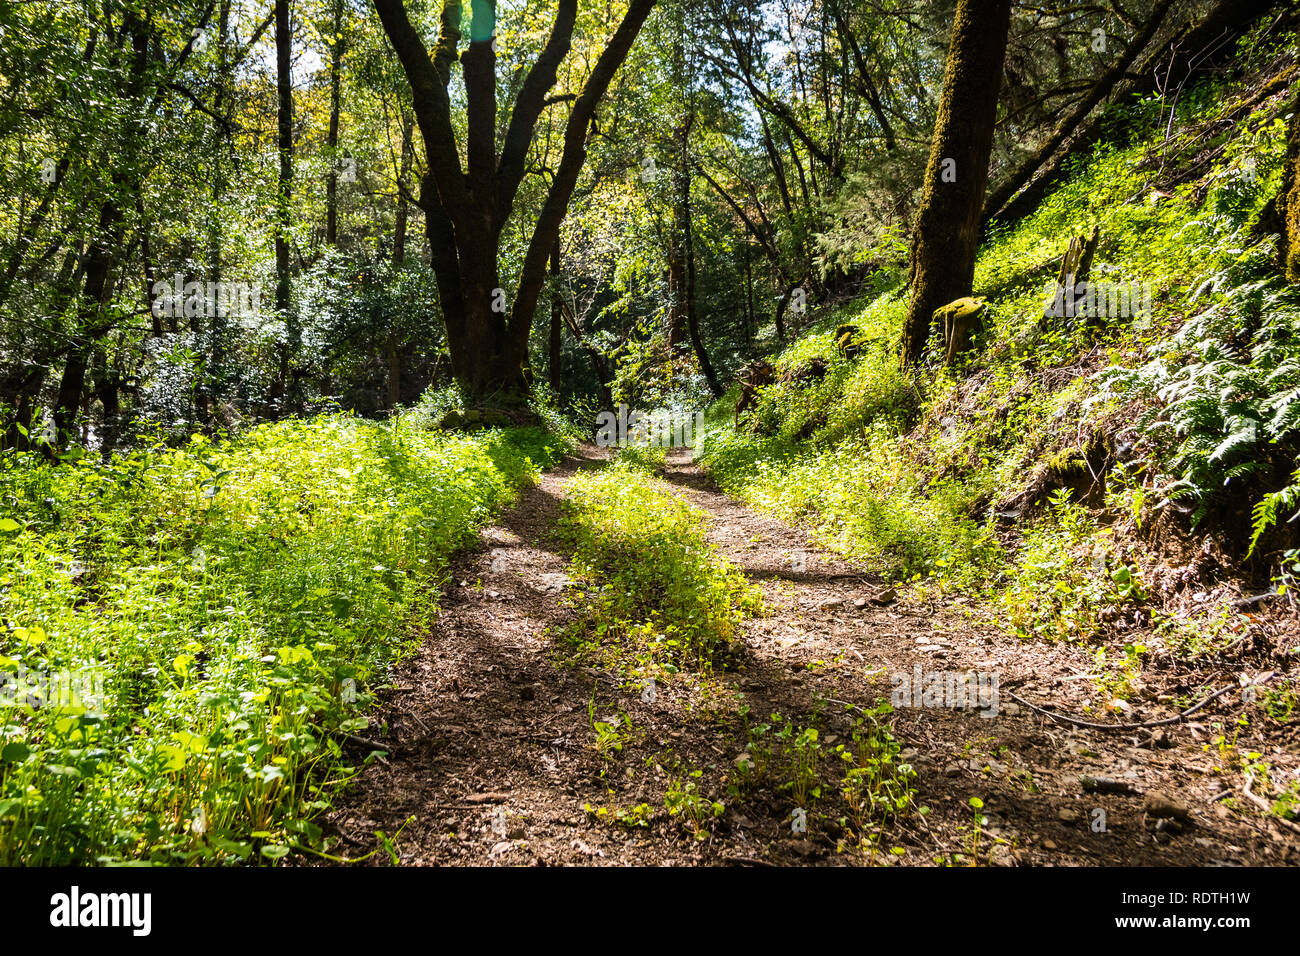 Walking trail through the forests of Uvas Canyon County Park, green Miner's Lettuce covering the ground, Santa Clara county, California Stock Photo